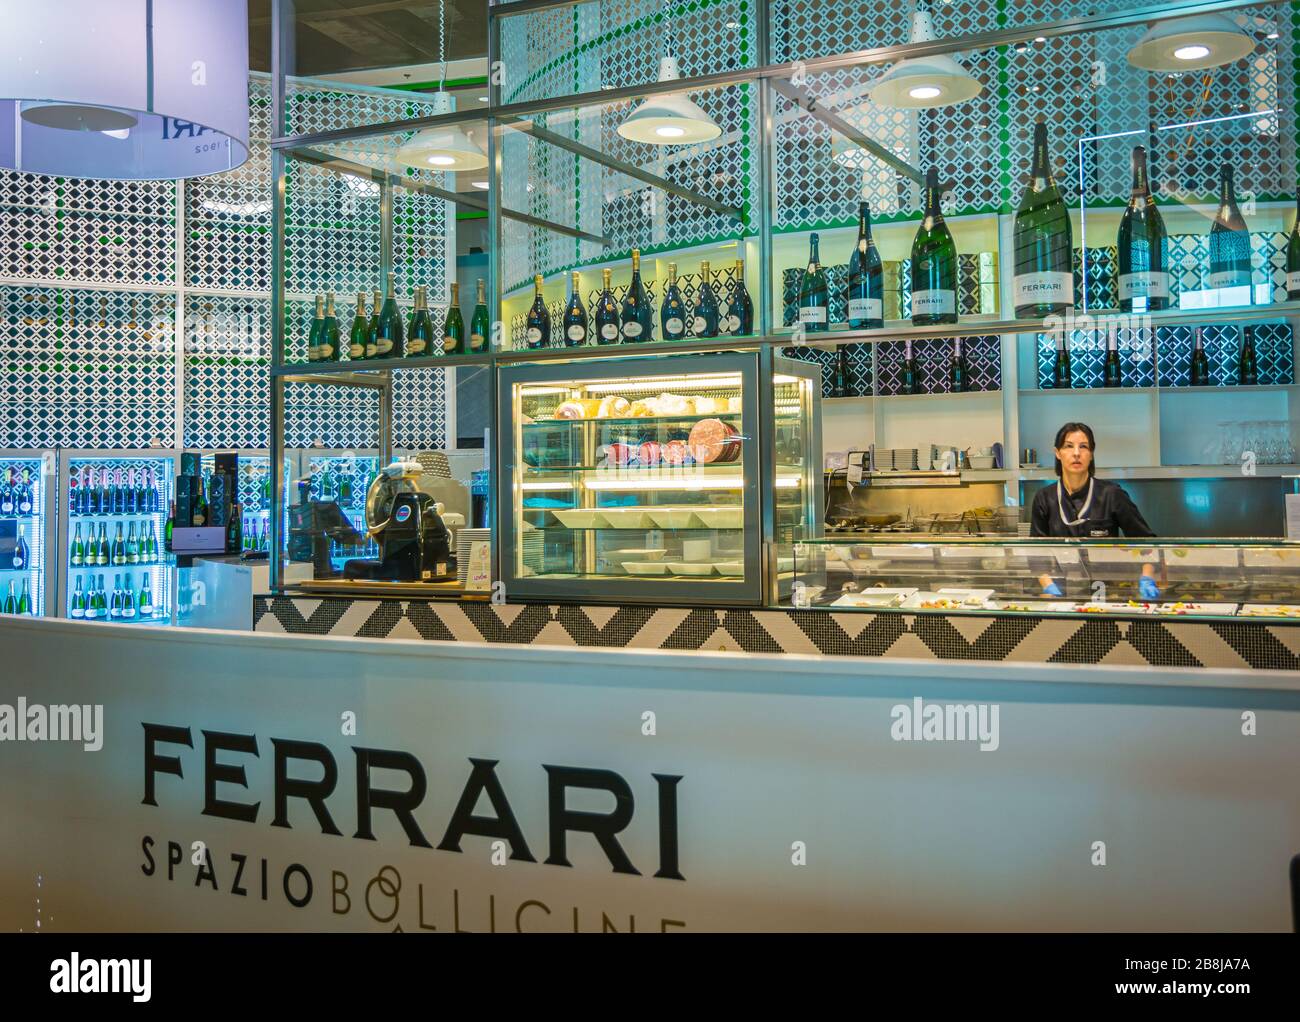 Linate airport, Milan, Lombardy, Italy, Europe - Ferrari Spazio Bollicine is inspired by the desire to bring the Trento Doc wine into the symbols. Stock Photo